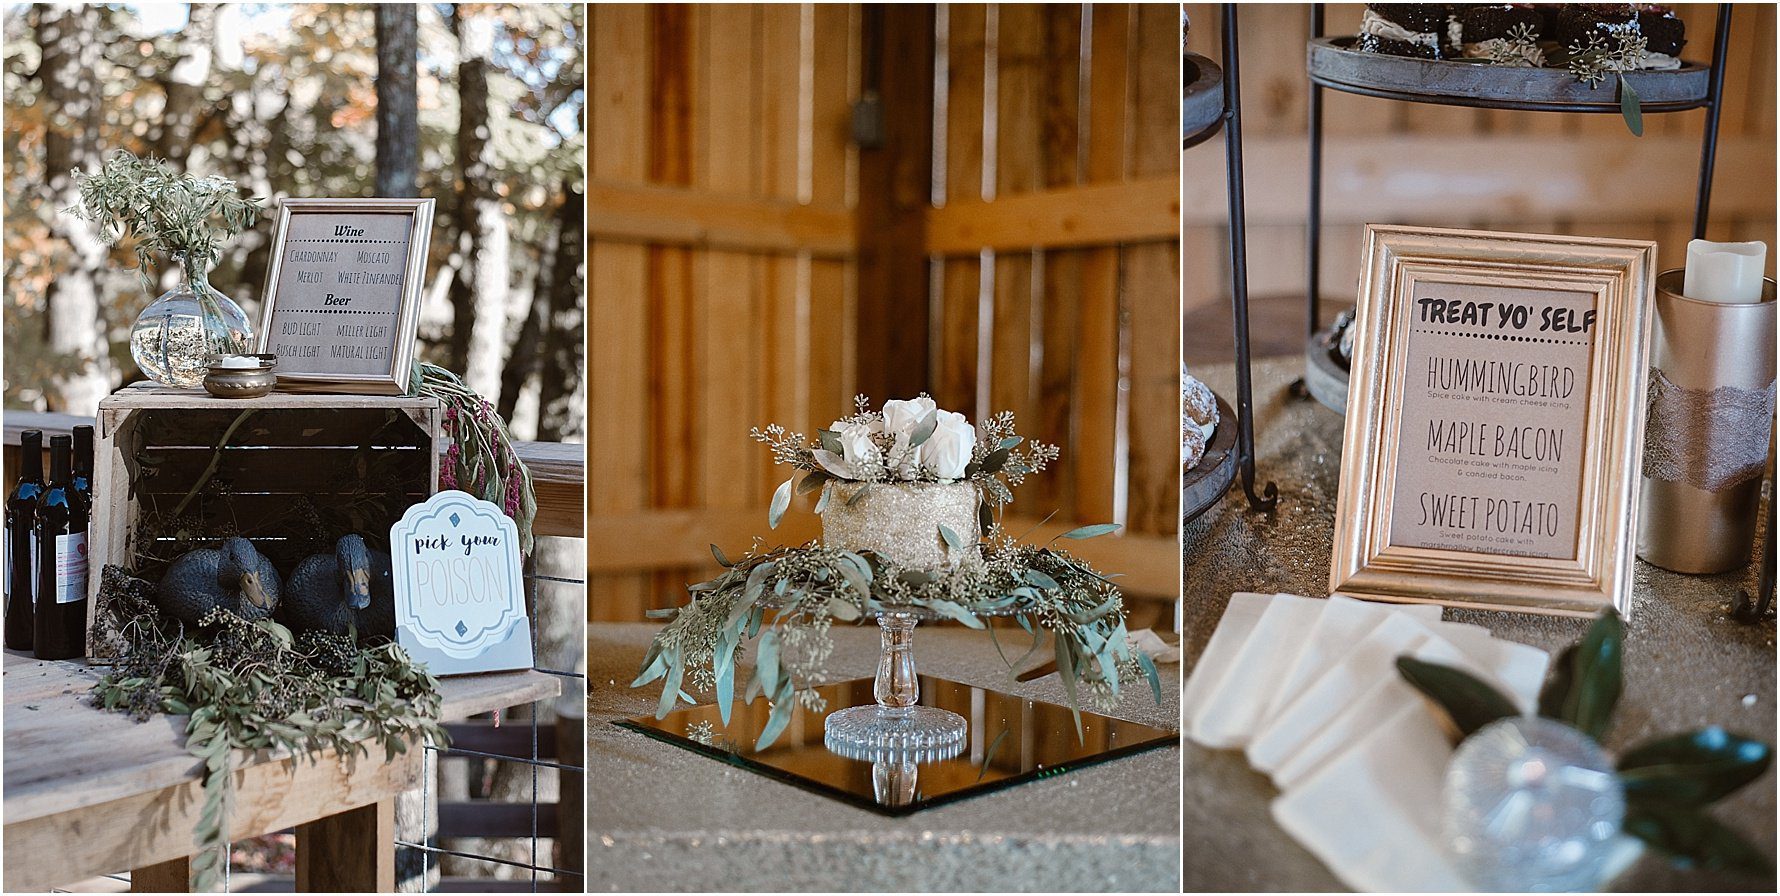 Barn Wedding Venues in Knoxville | Erin Morrison Photography www.erinmorrisonphotography.com